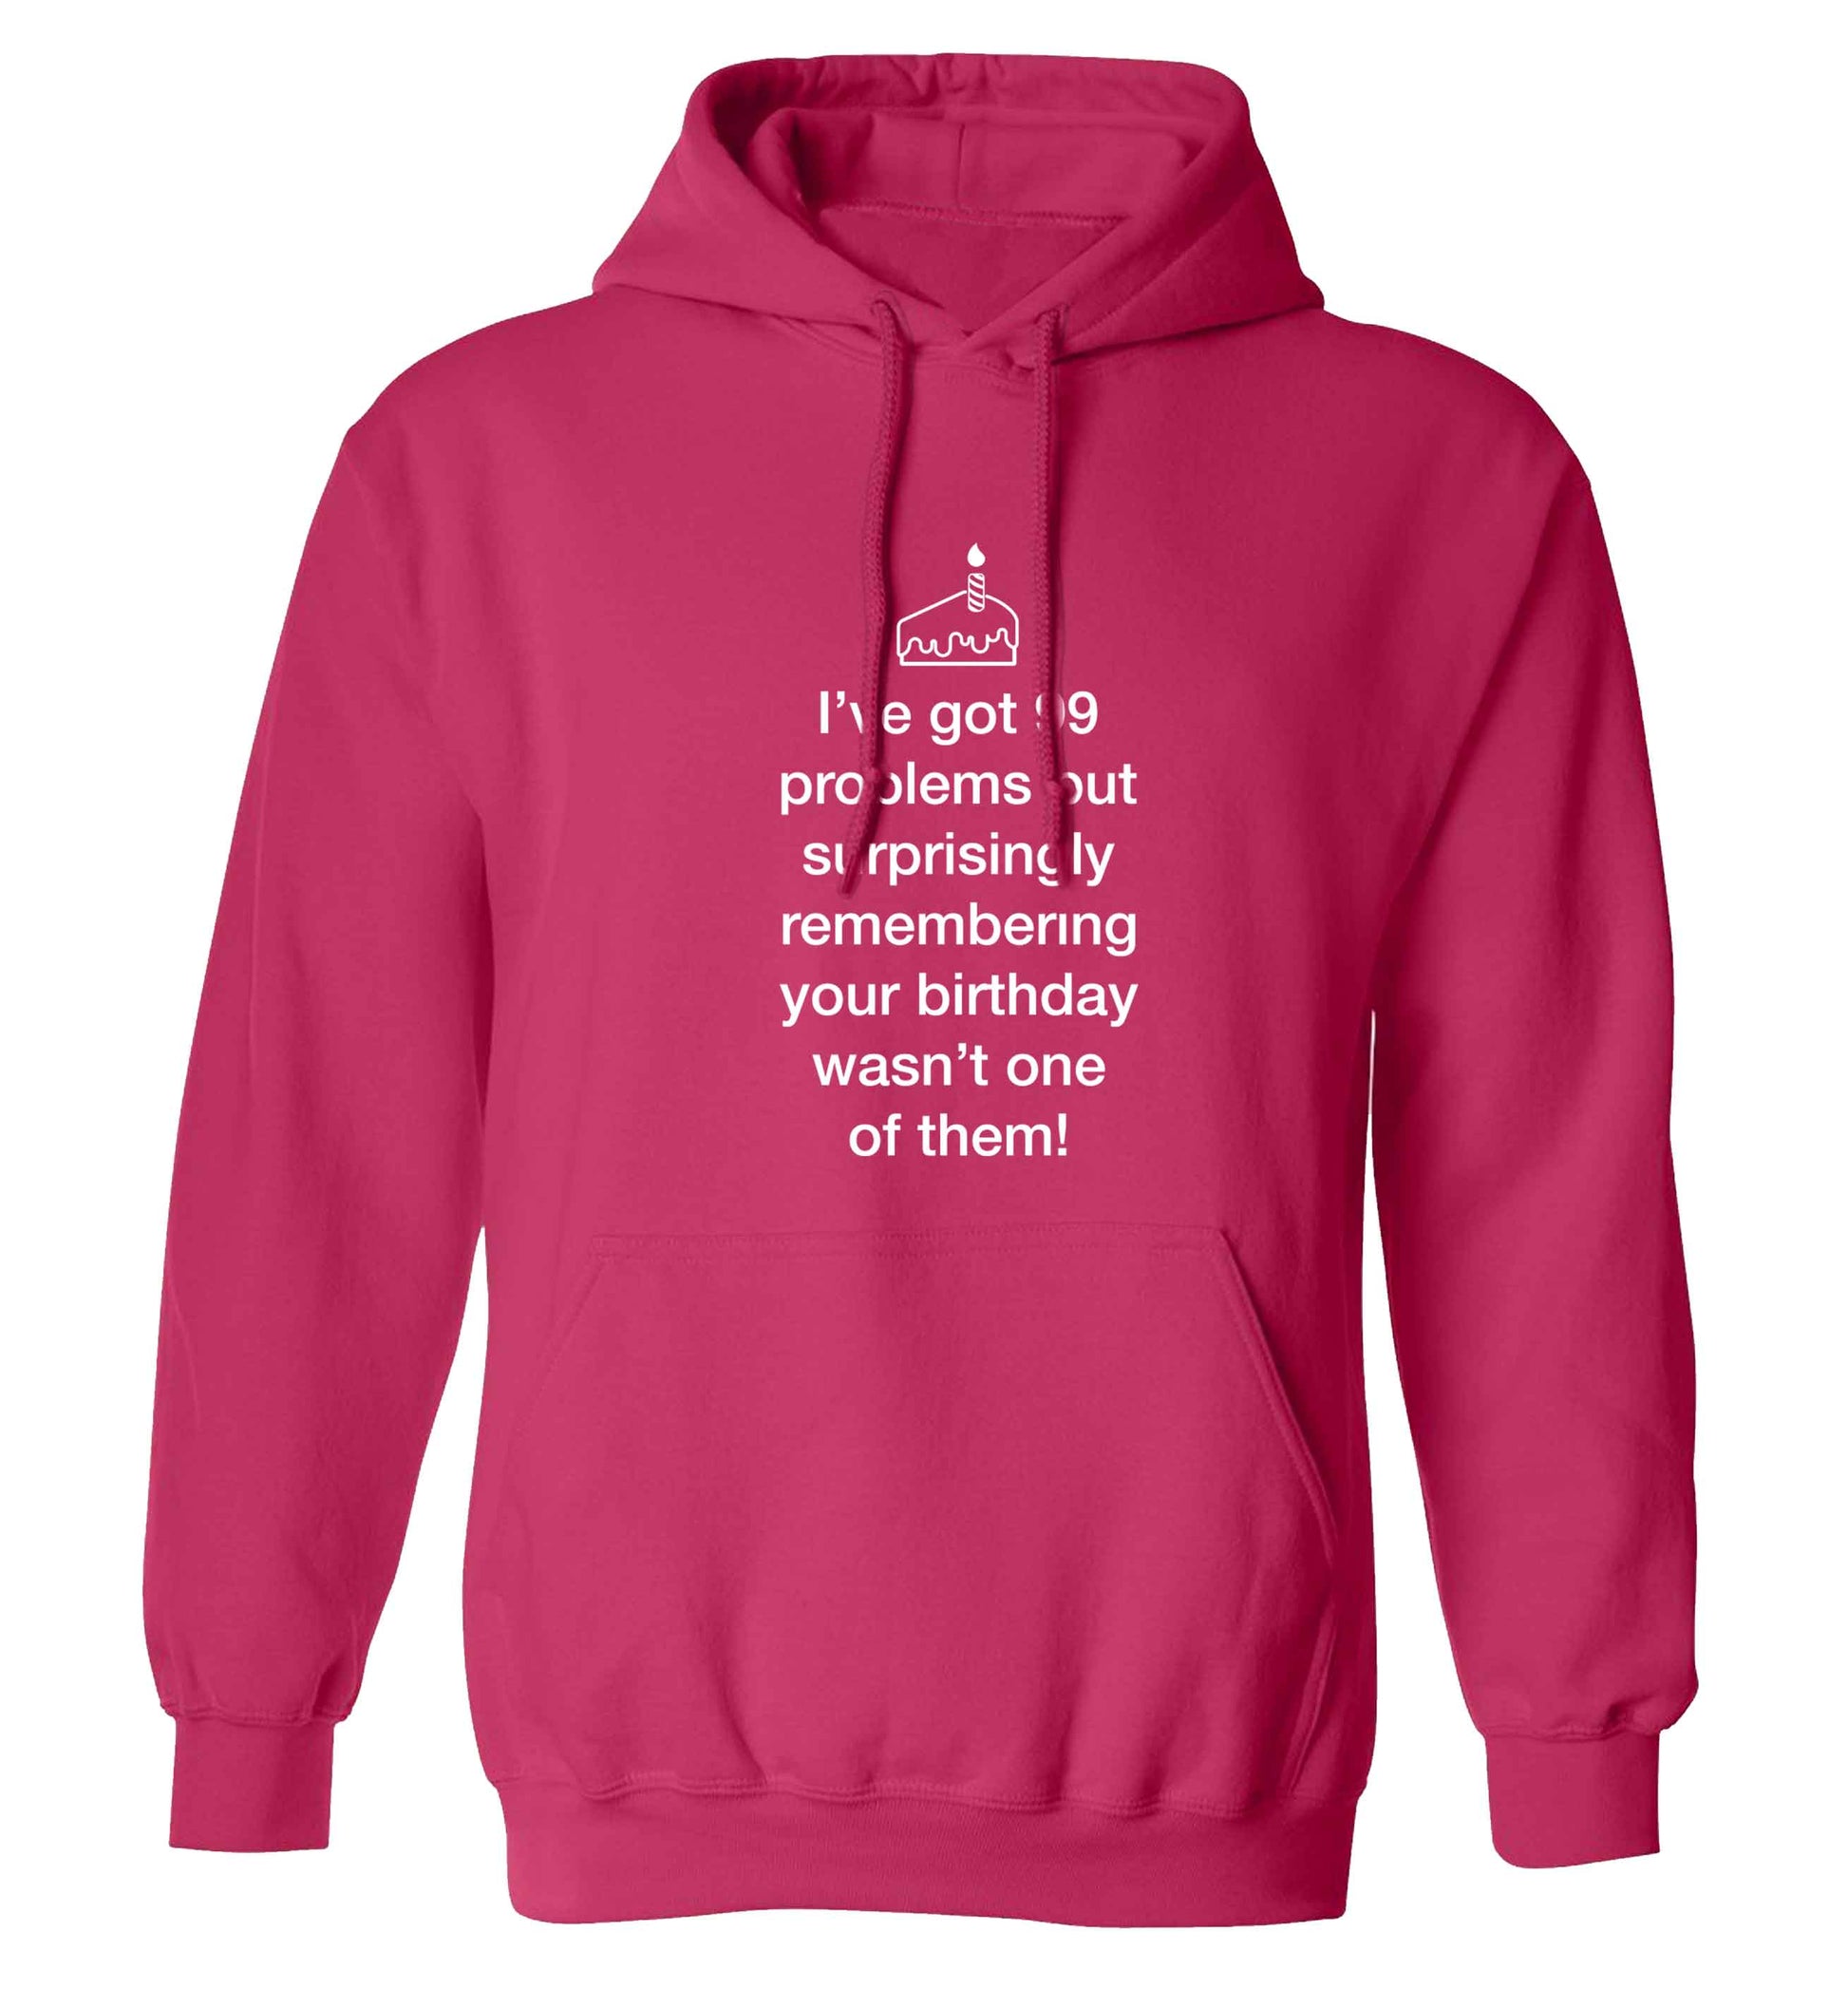 I've got 99 problems but surprisingly remembering your birthday wasn't one of them! adults unisex pink hoodie 2XL